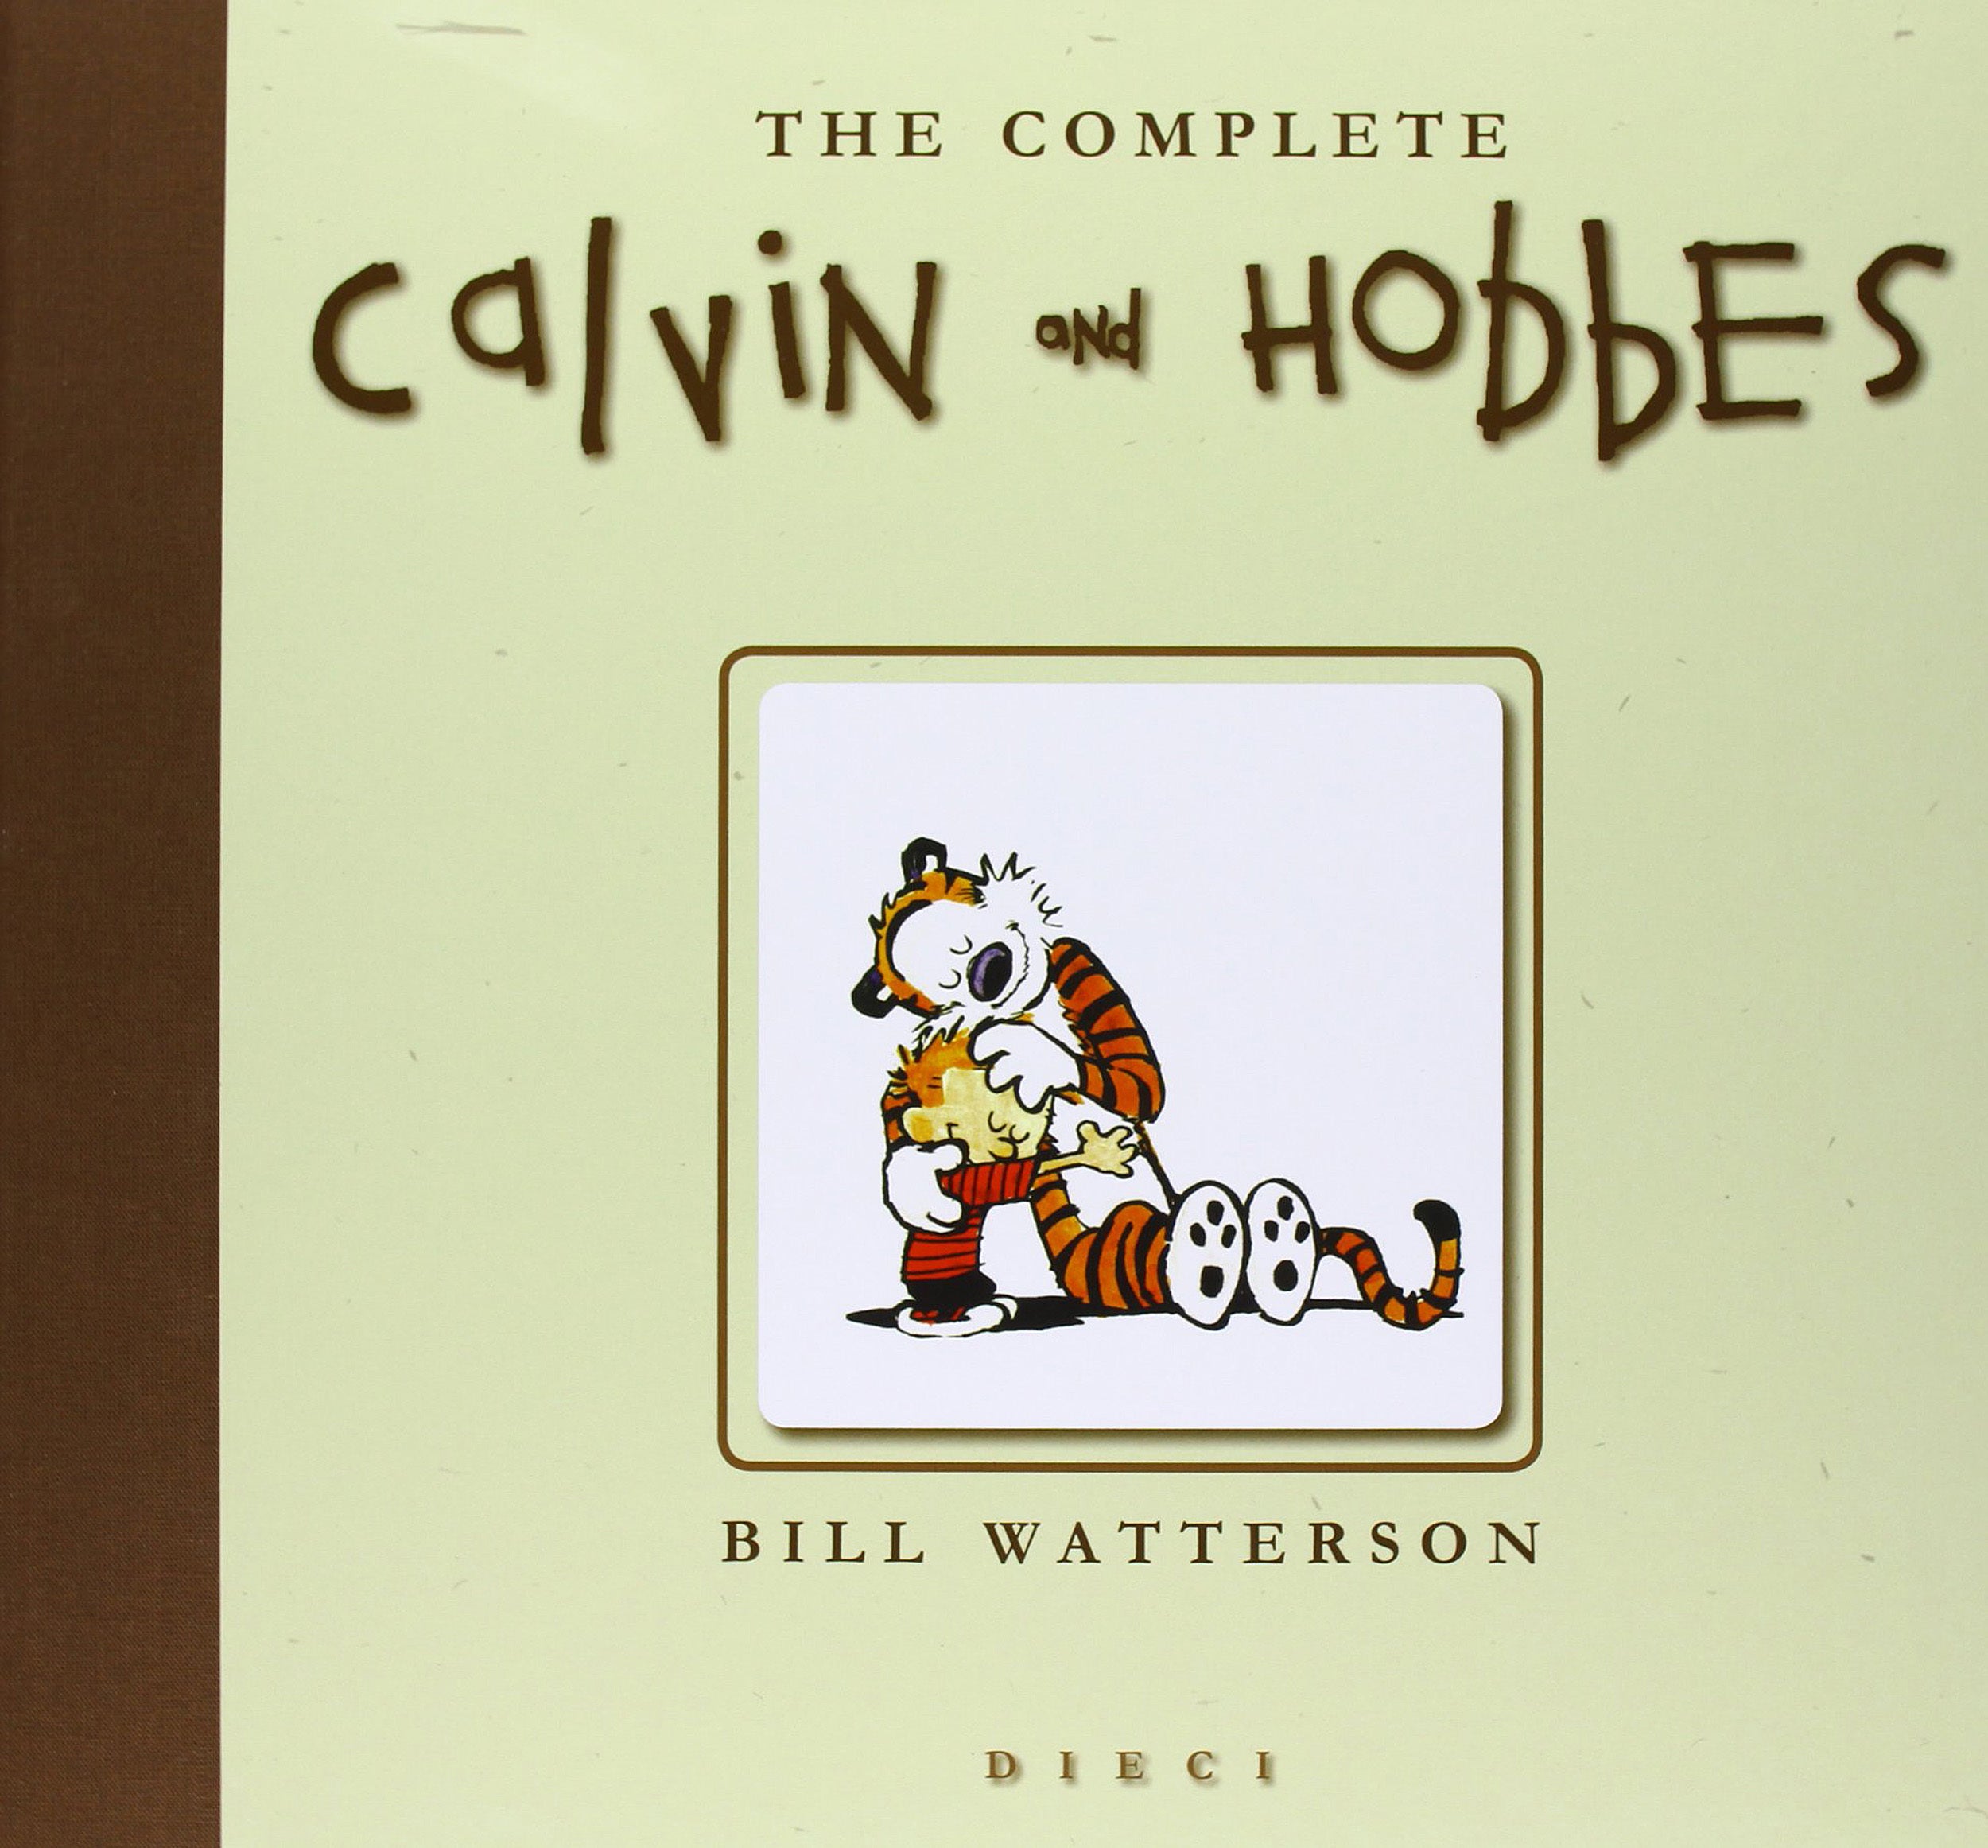 Cover: “The Complete Calvin & Hobbes” by Bill Watterson.